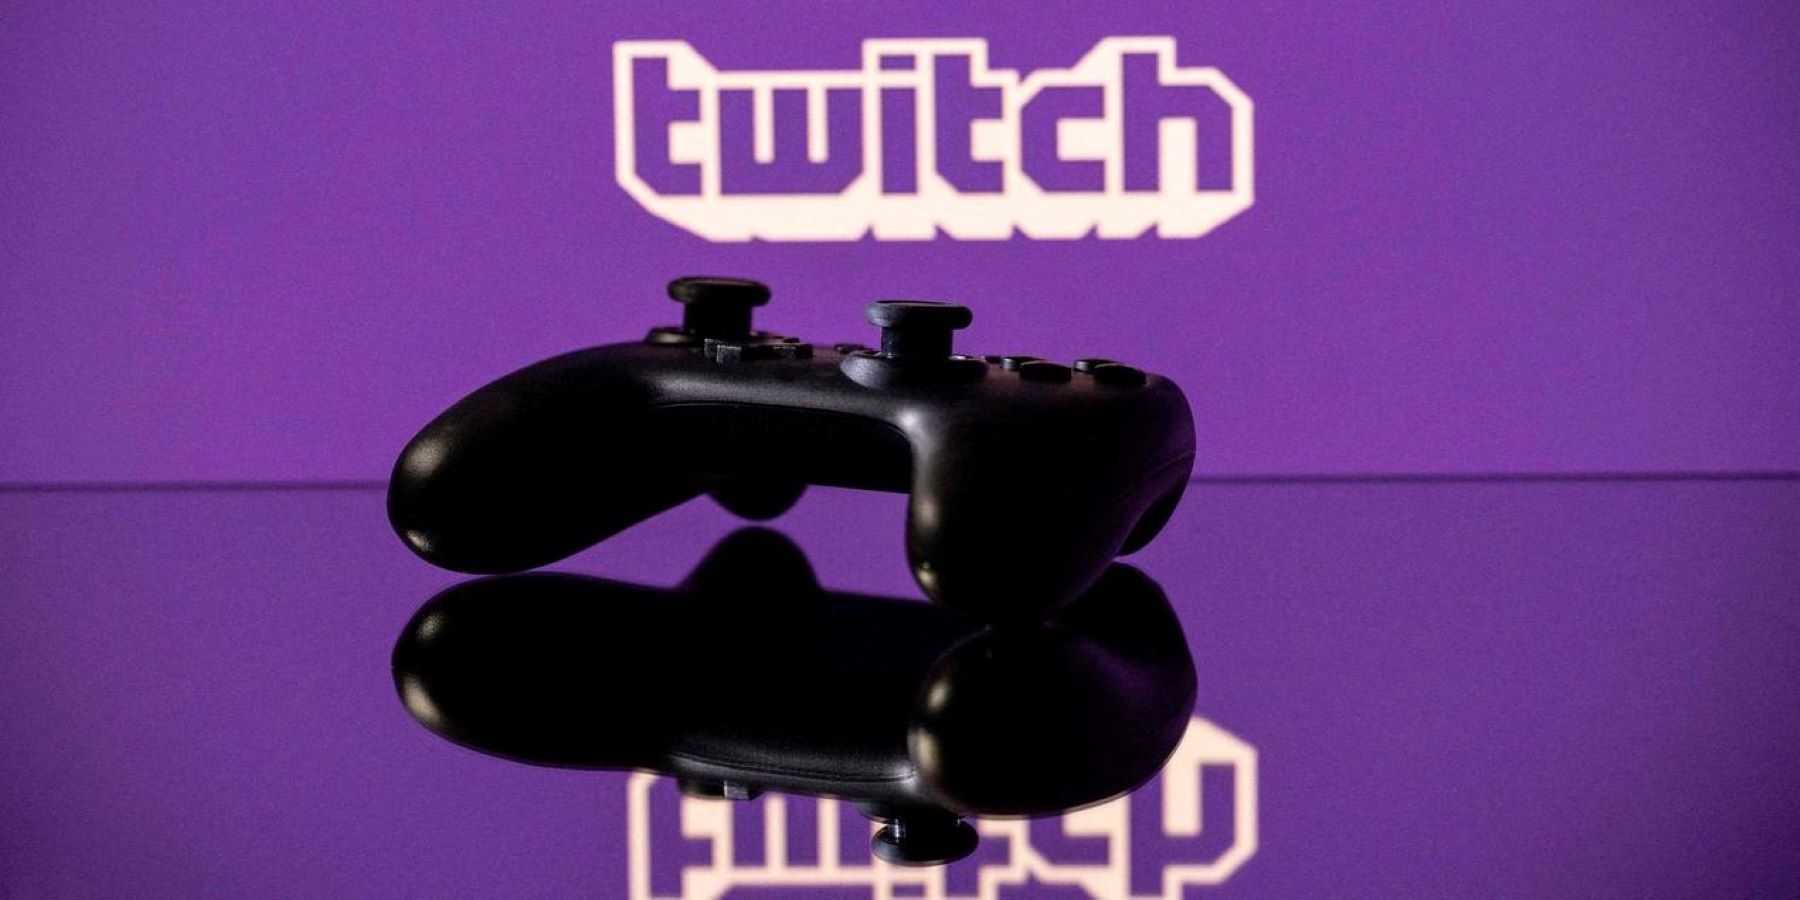 A Nintendo Switch Pro Controller on a reflective surface in front of the Twitch logo